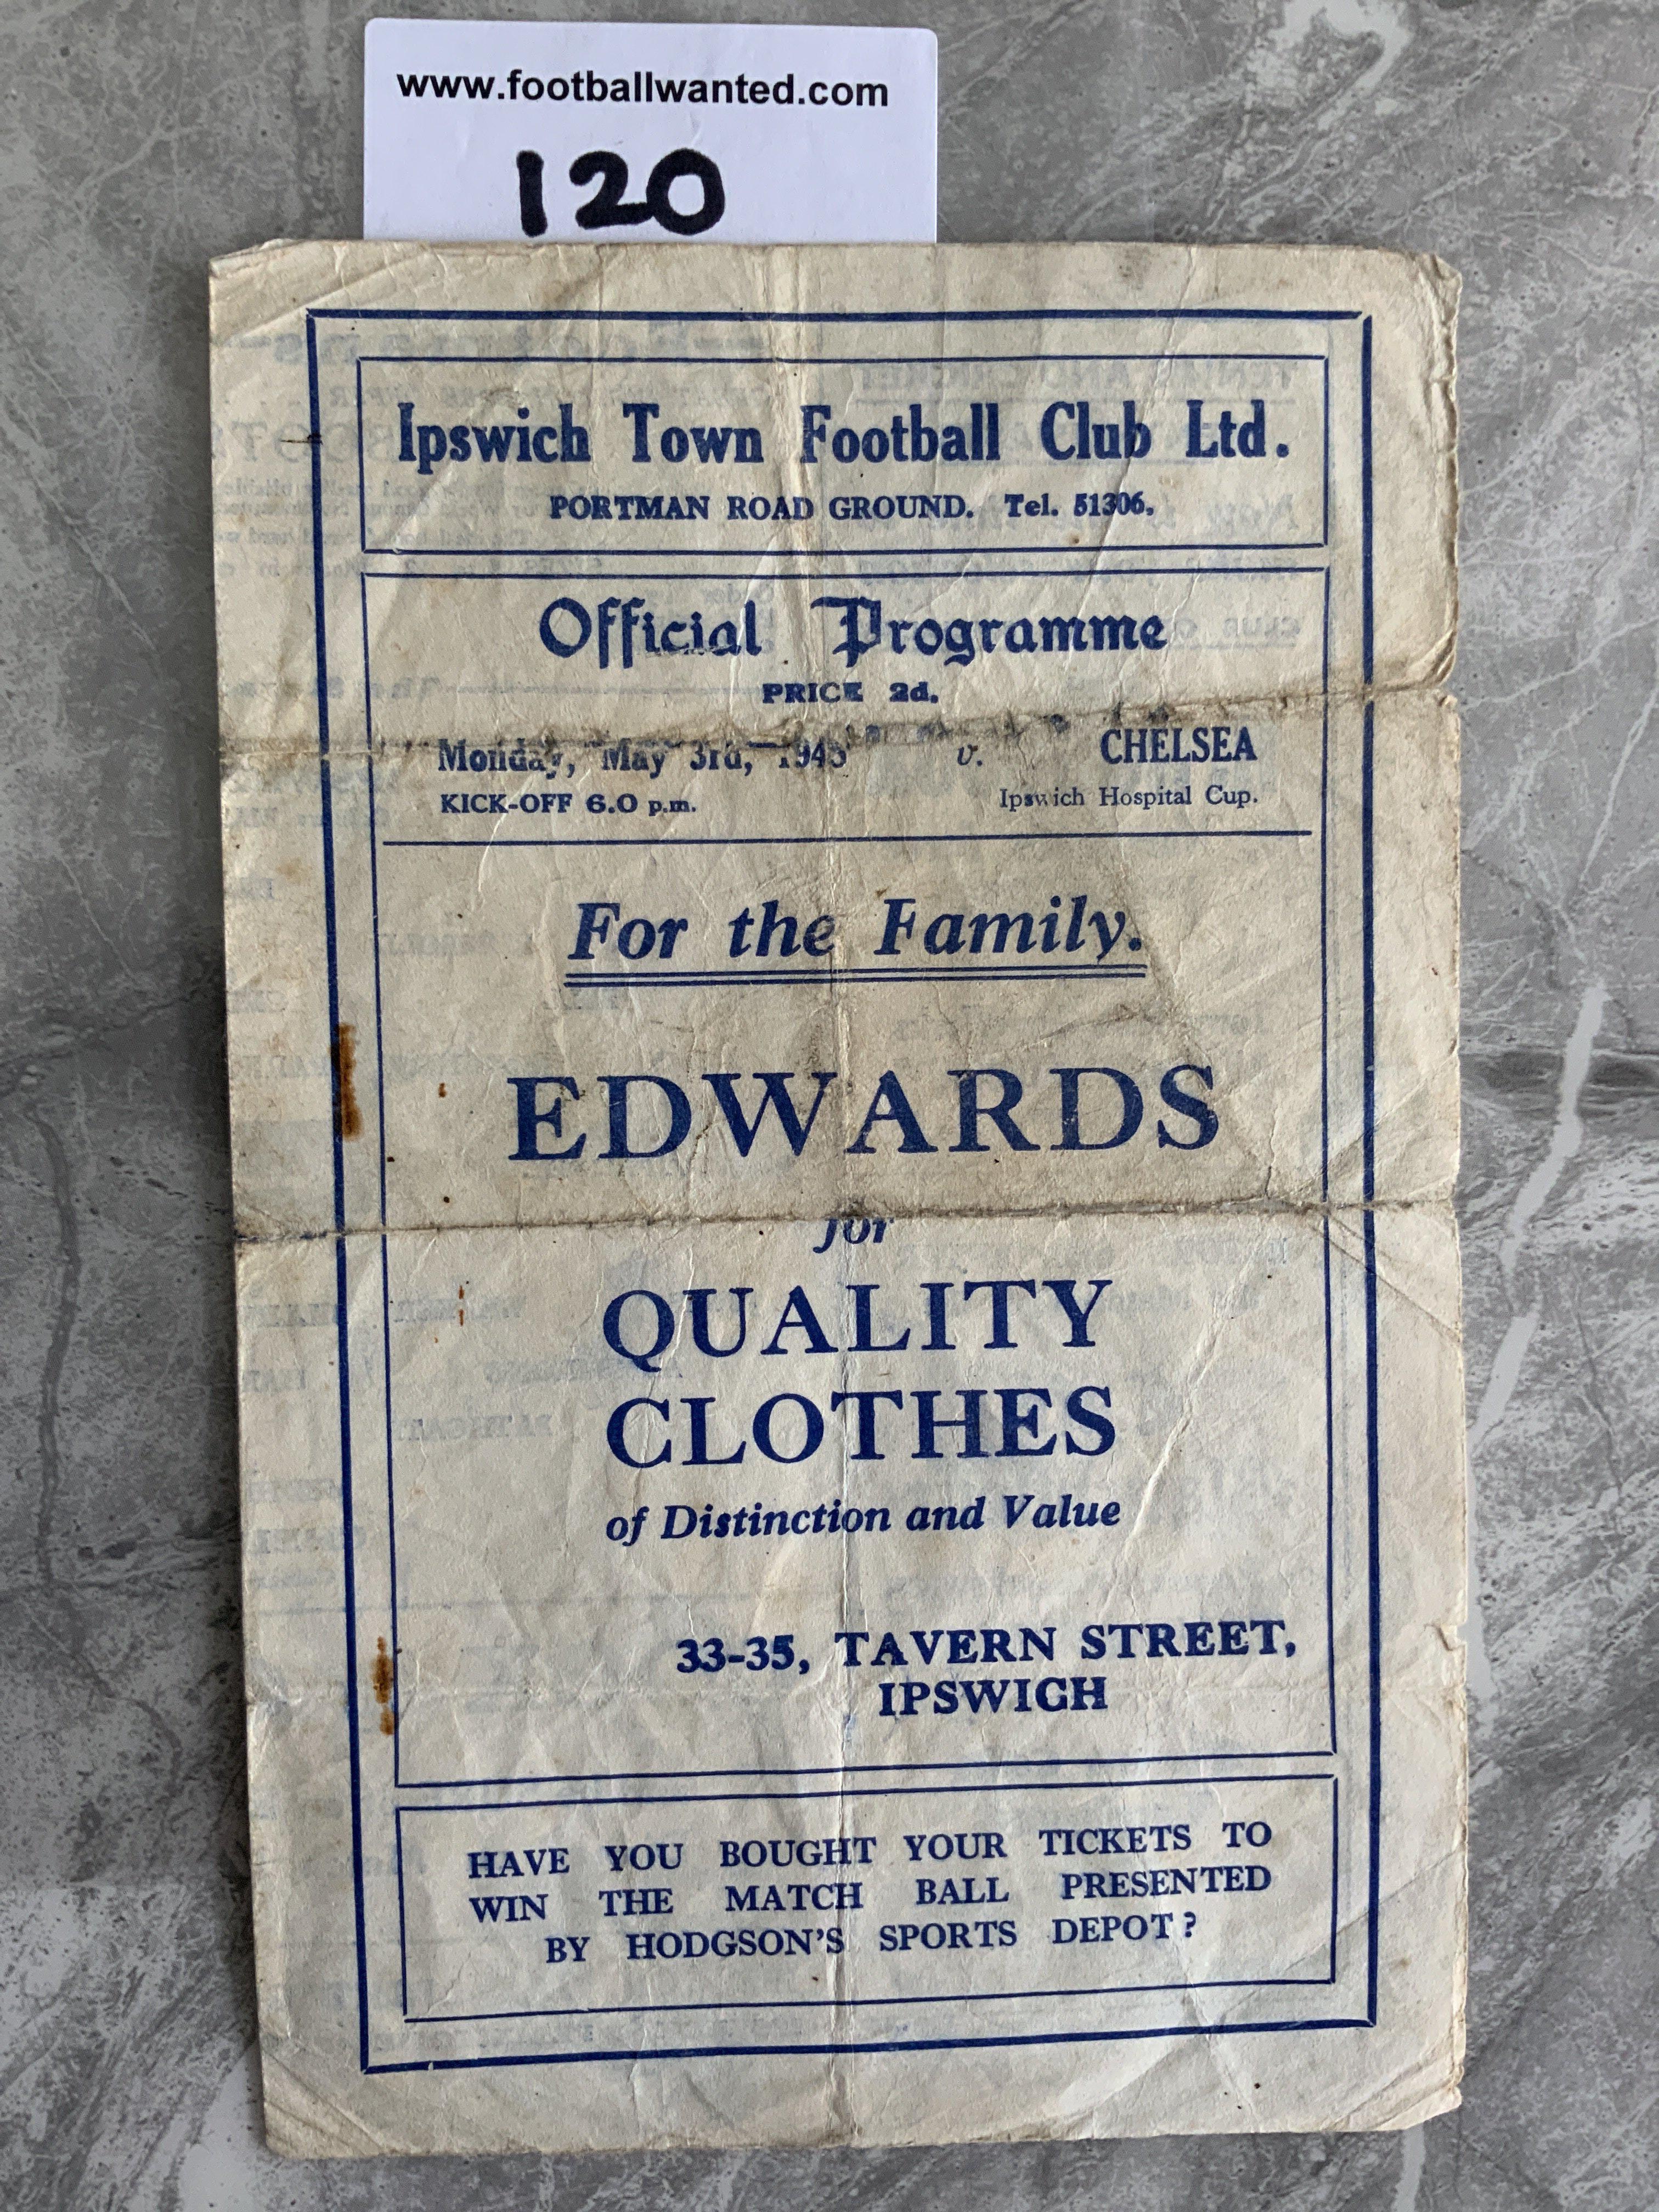 47/48 Ipswich Town v Chelsea Hospital Cup Football Programme: Dated 3 5 1948 with heavy wear to